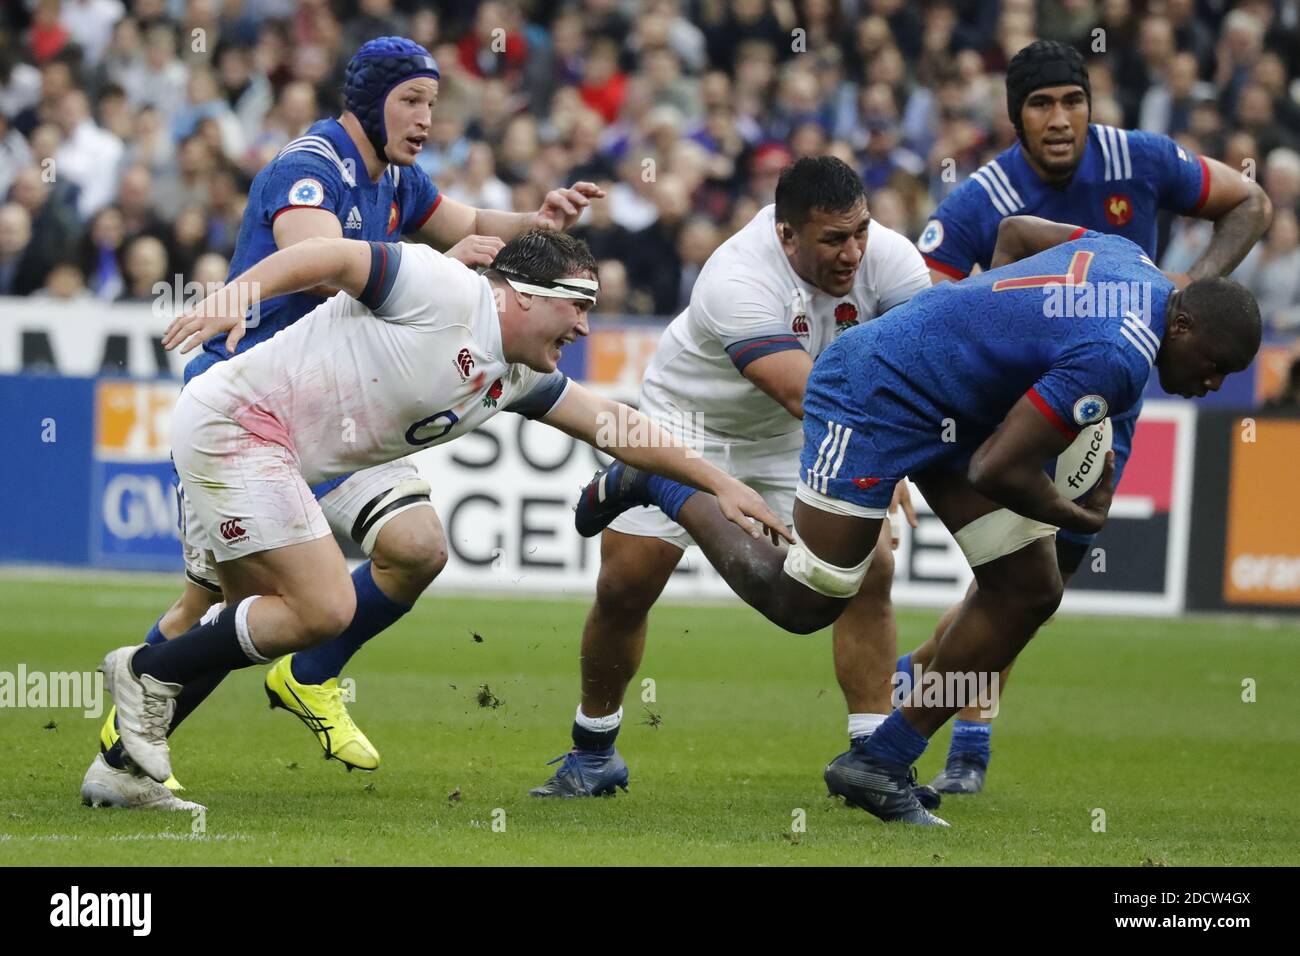 France's Yacouba Camara during Rugby Natwest 6 Nations Tournament, France  vs England in Stade de France, St-Denis, France, on March 10th, 2018. France  won 22-16. Photo by Henri Szwarc/ABACAPRESS.COM Stock Photo -